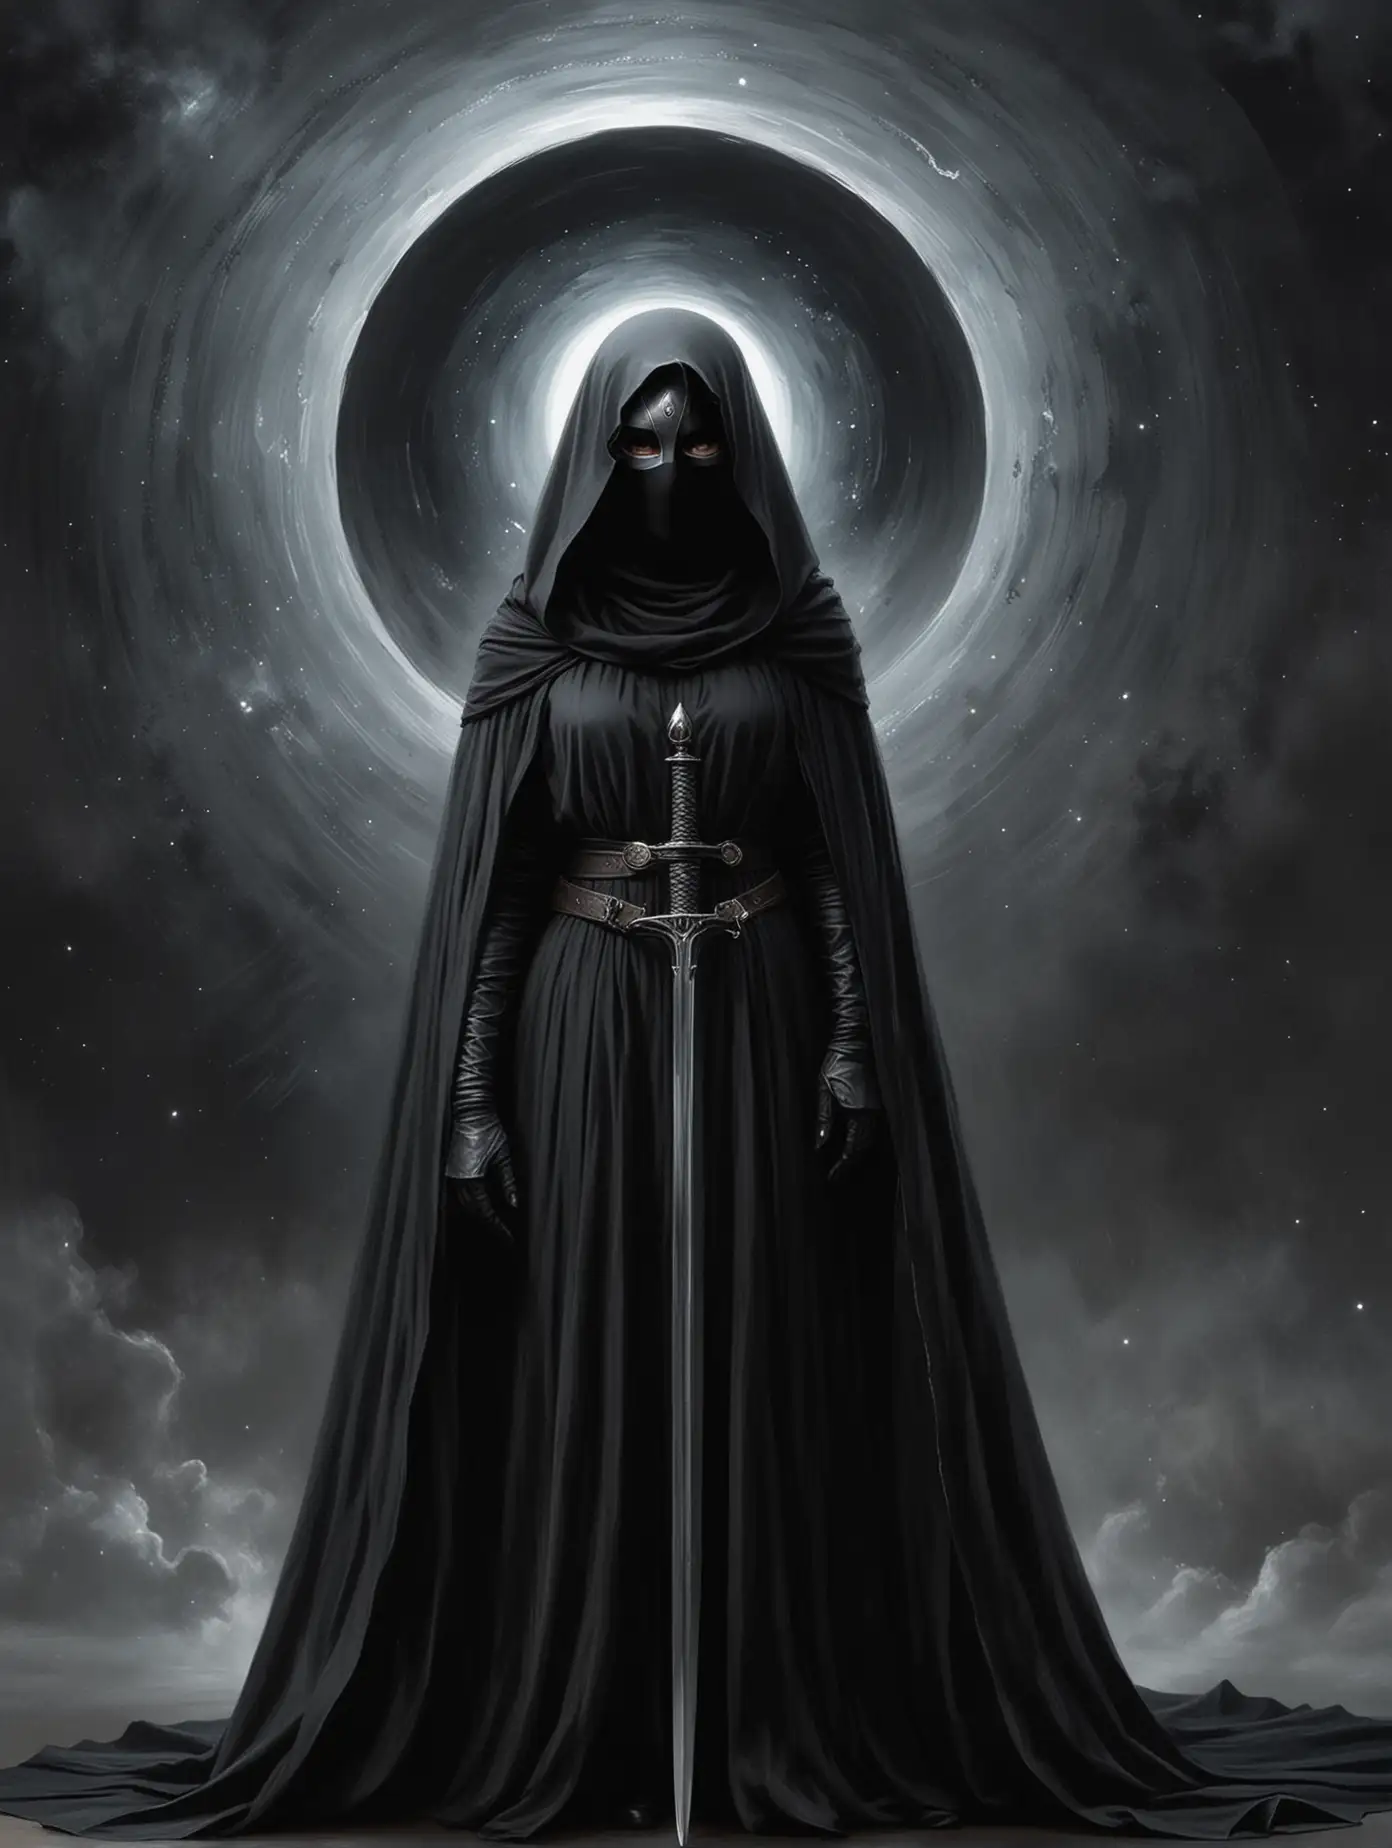 Mystical-Sister-Geserit-Stands-at-the-Edge-of-a-Cosmic-Abyss-with-Black-Sword